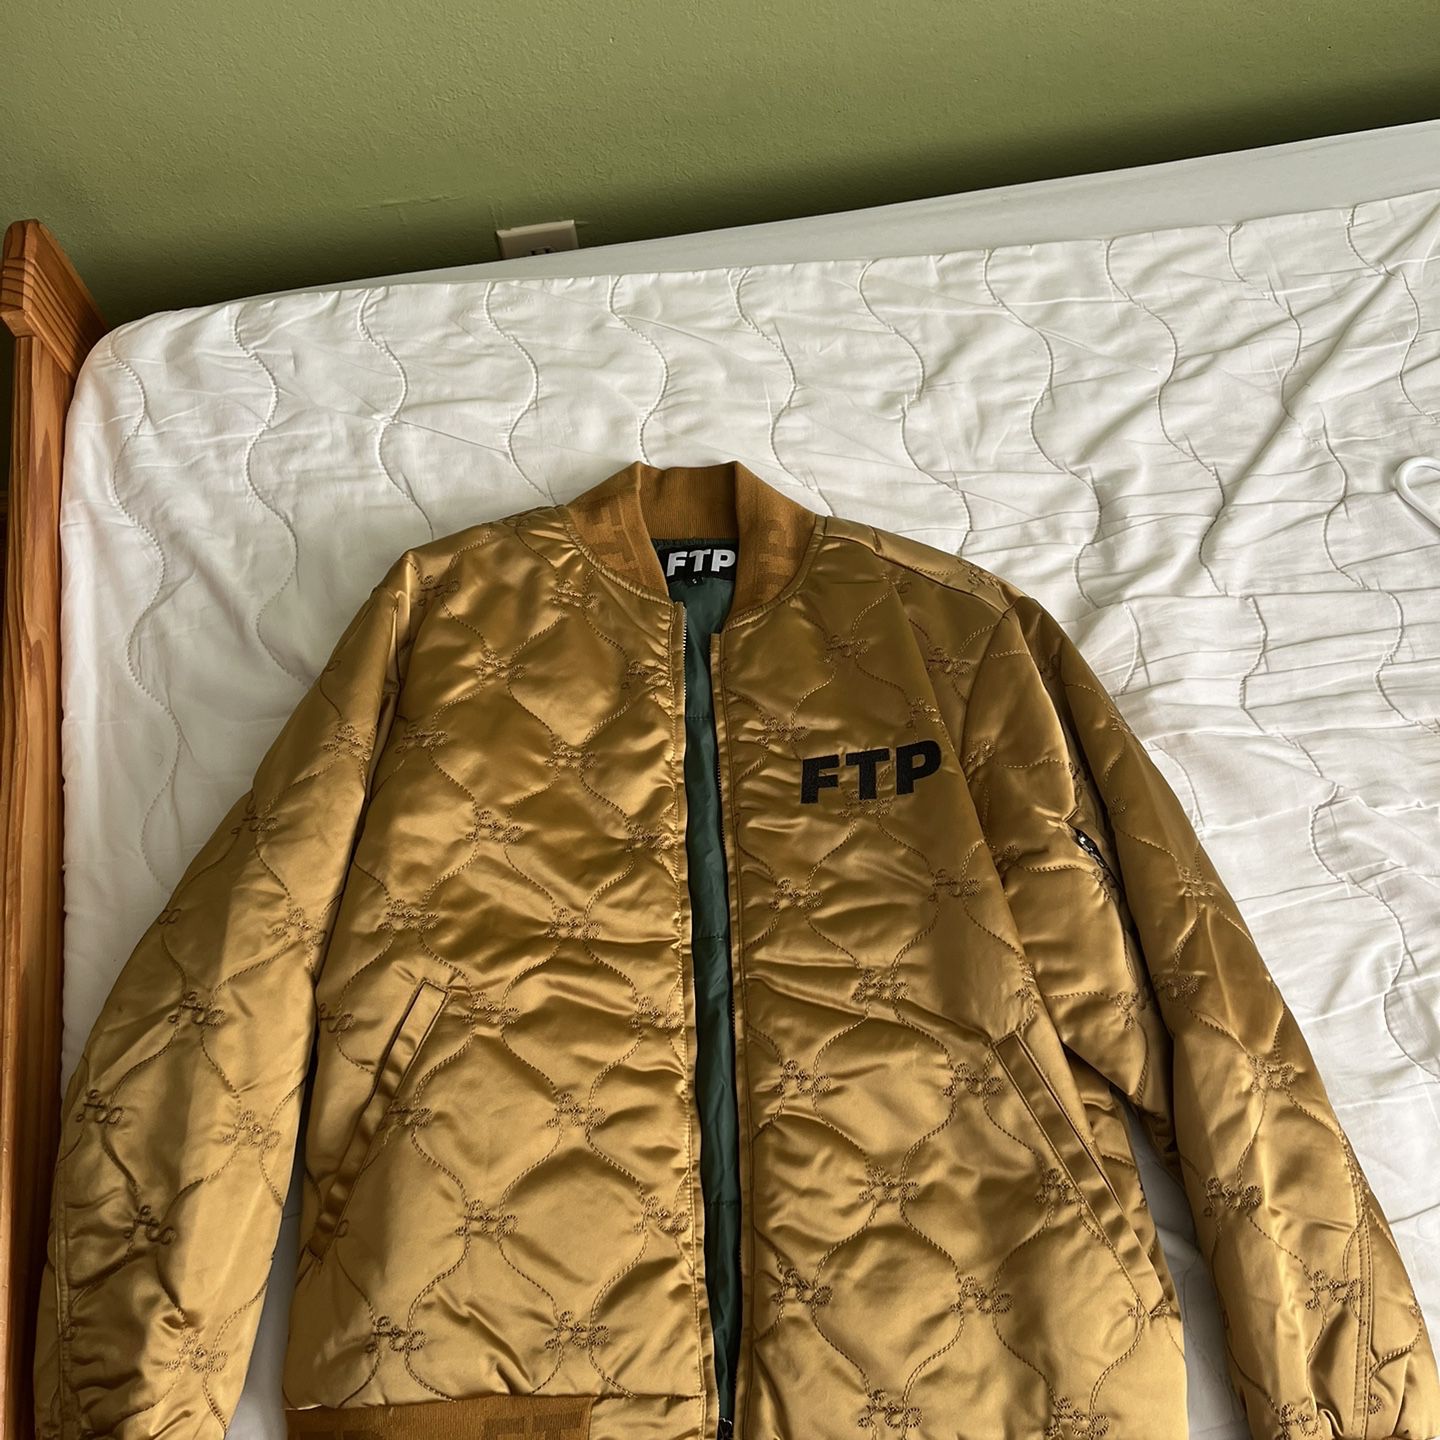 Authentic  FTP Gold Bomber (Size Small)